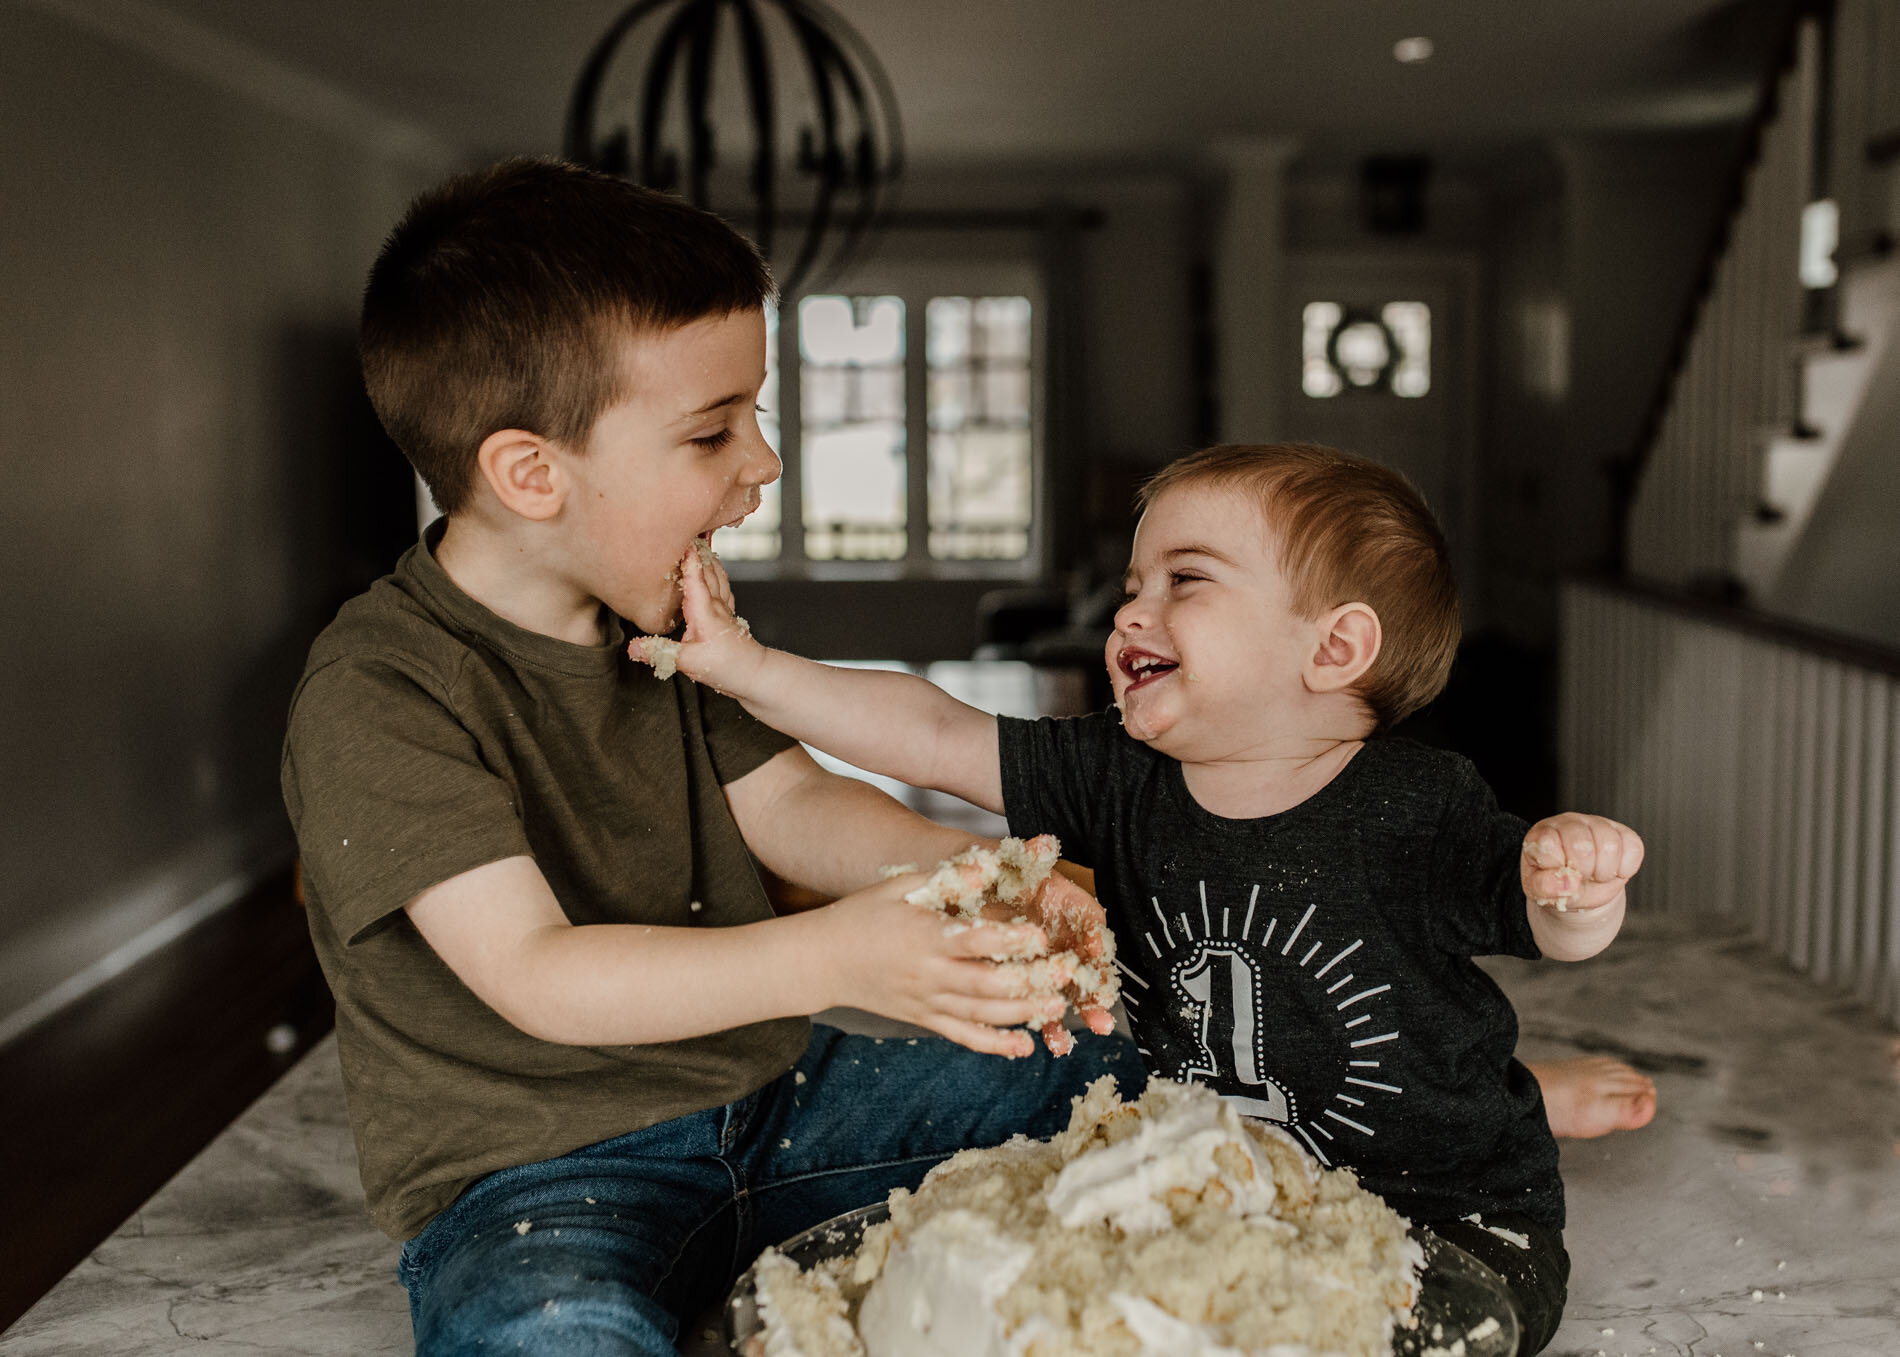 fun-moment-at-cake-smash-siblings-at-home-lifetyle-photo-Whitby.JPG